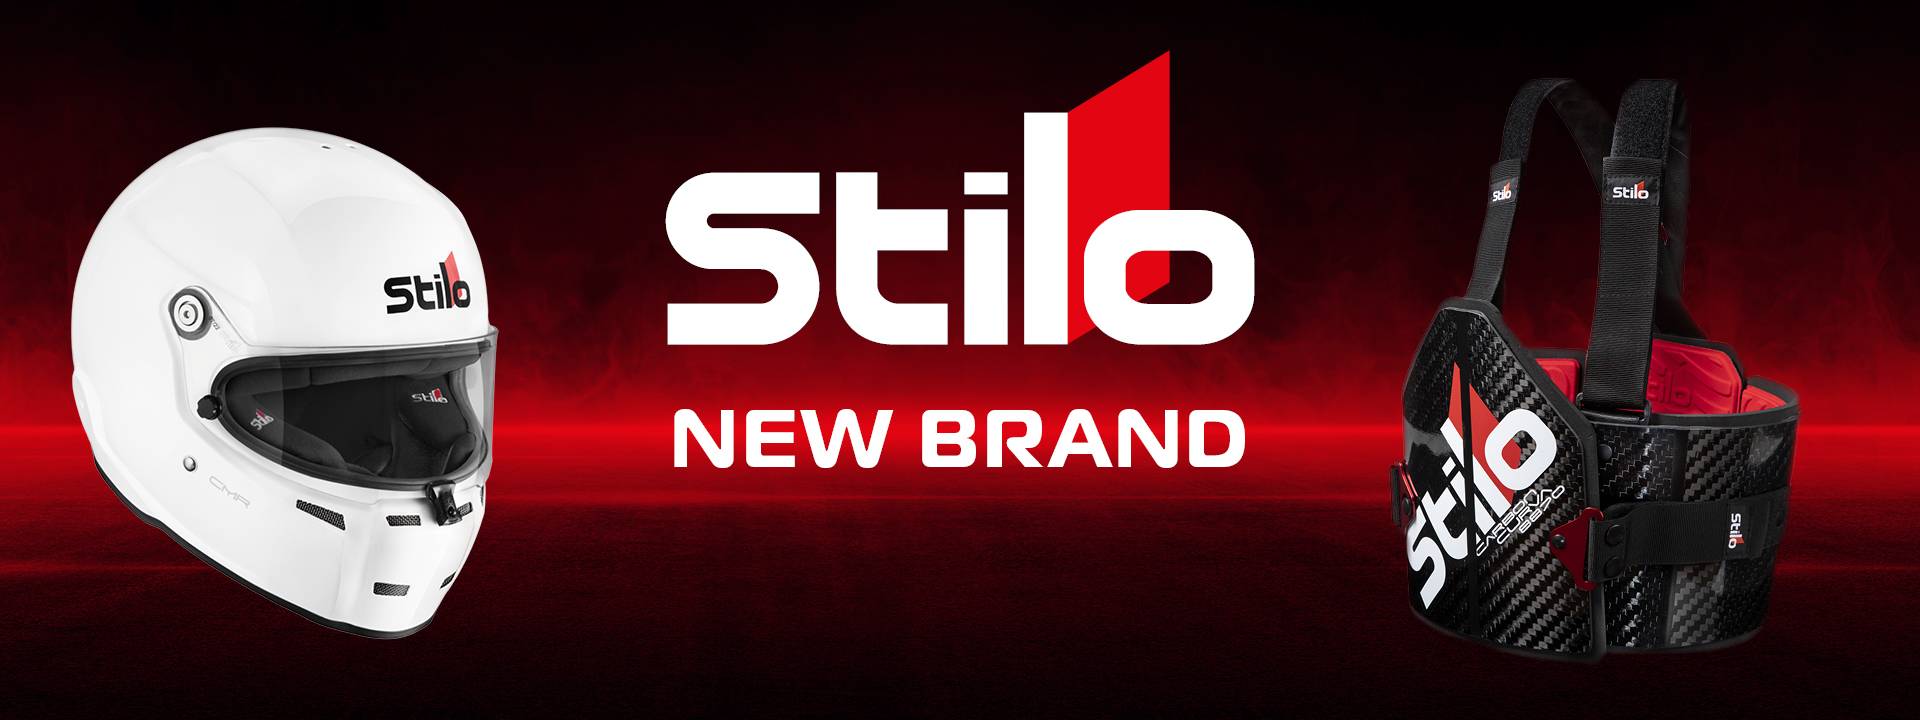 STILO helmets, helmets accessories and ribs protector